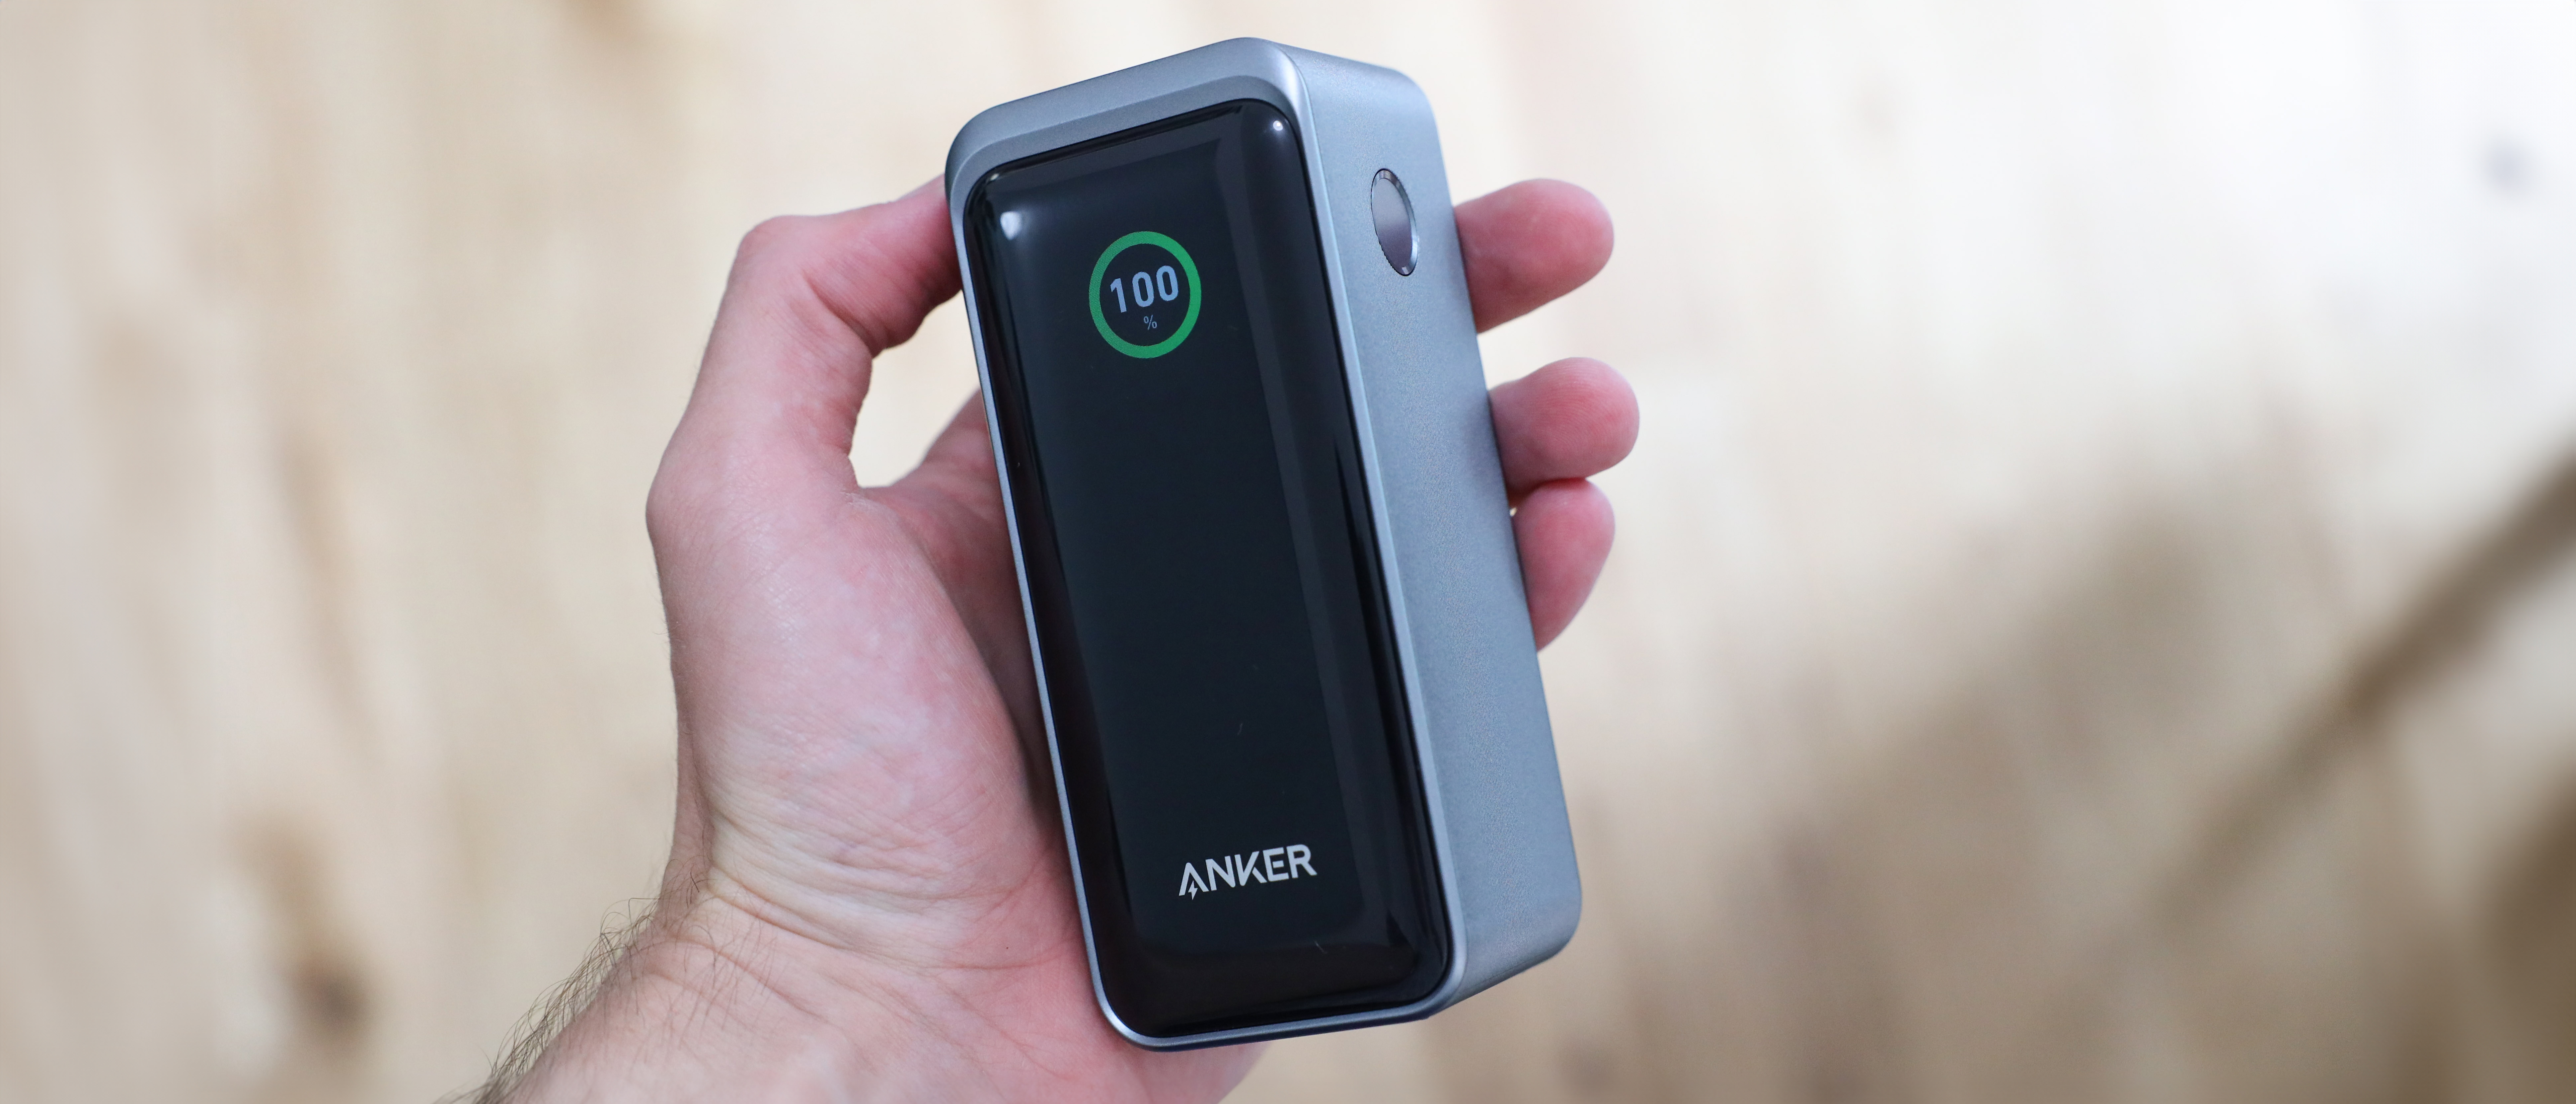 Anker Prime 20,000mAh Power Bank (200W) with 100W Charging Base - Anker US